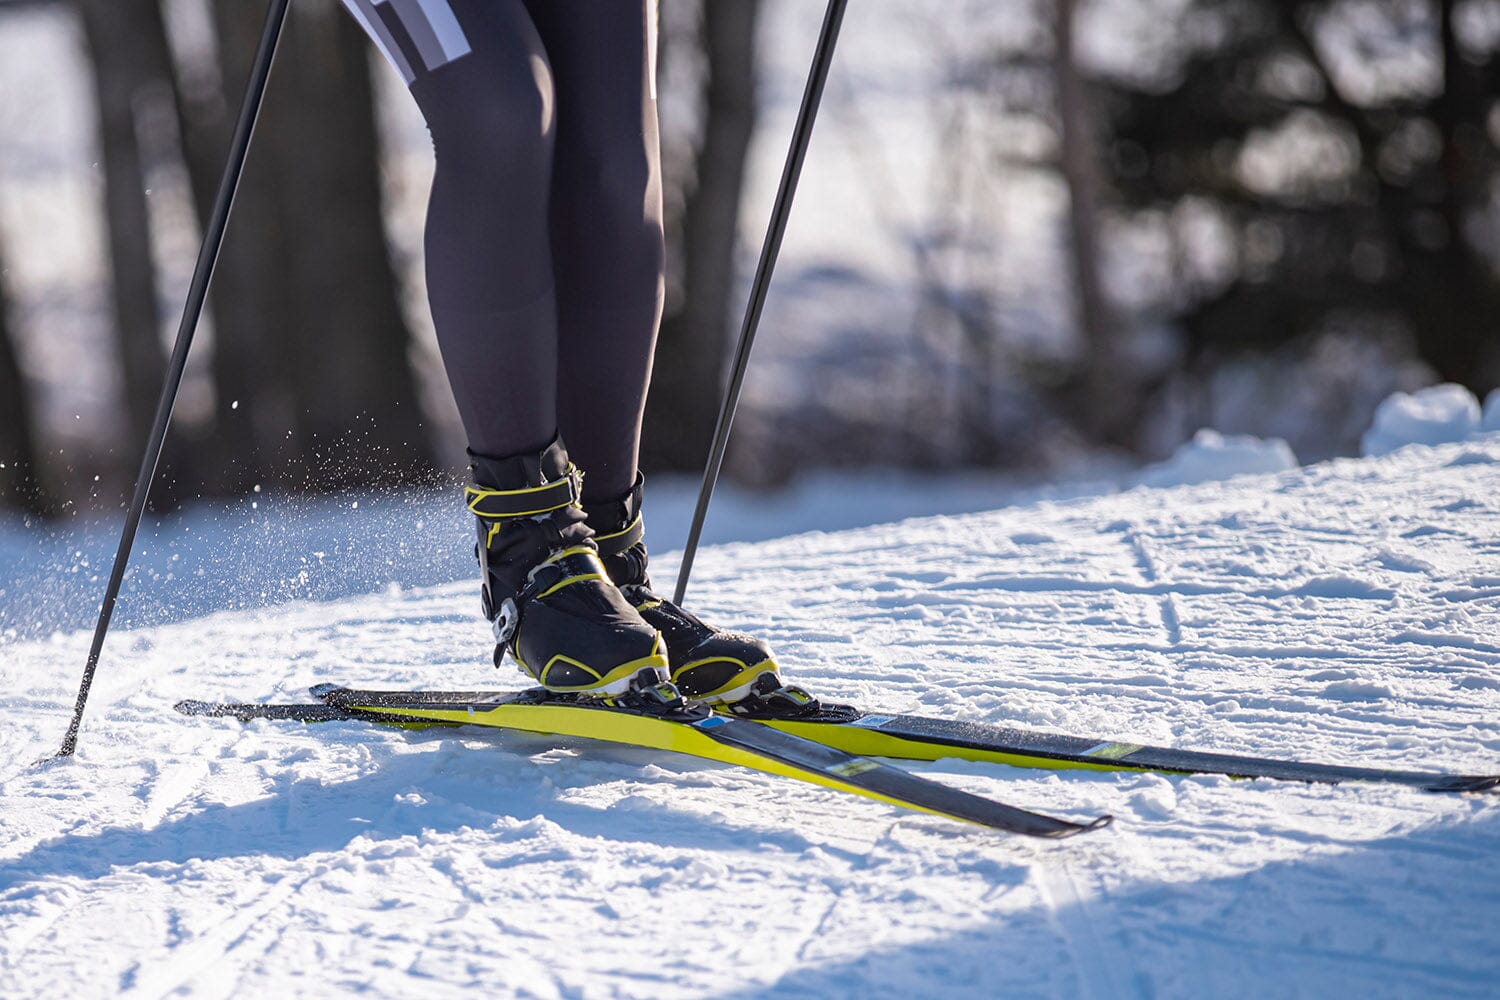 How to choose cross-country skis